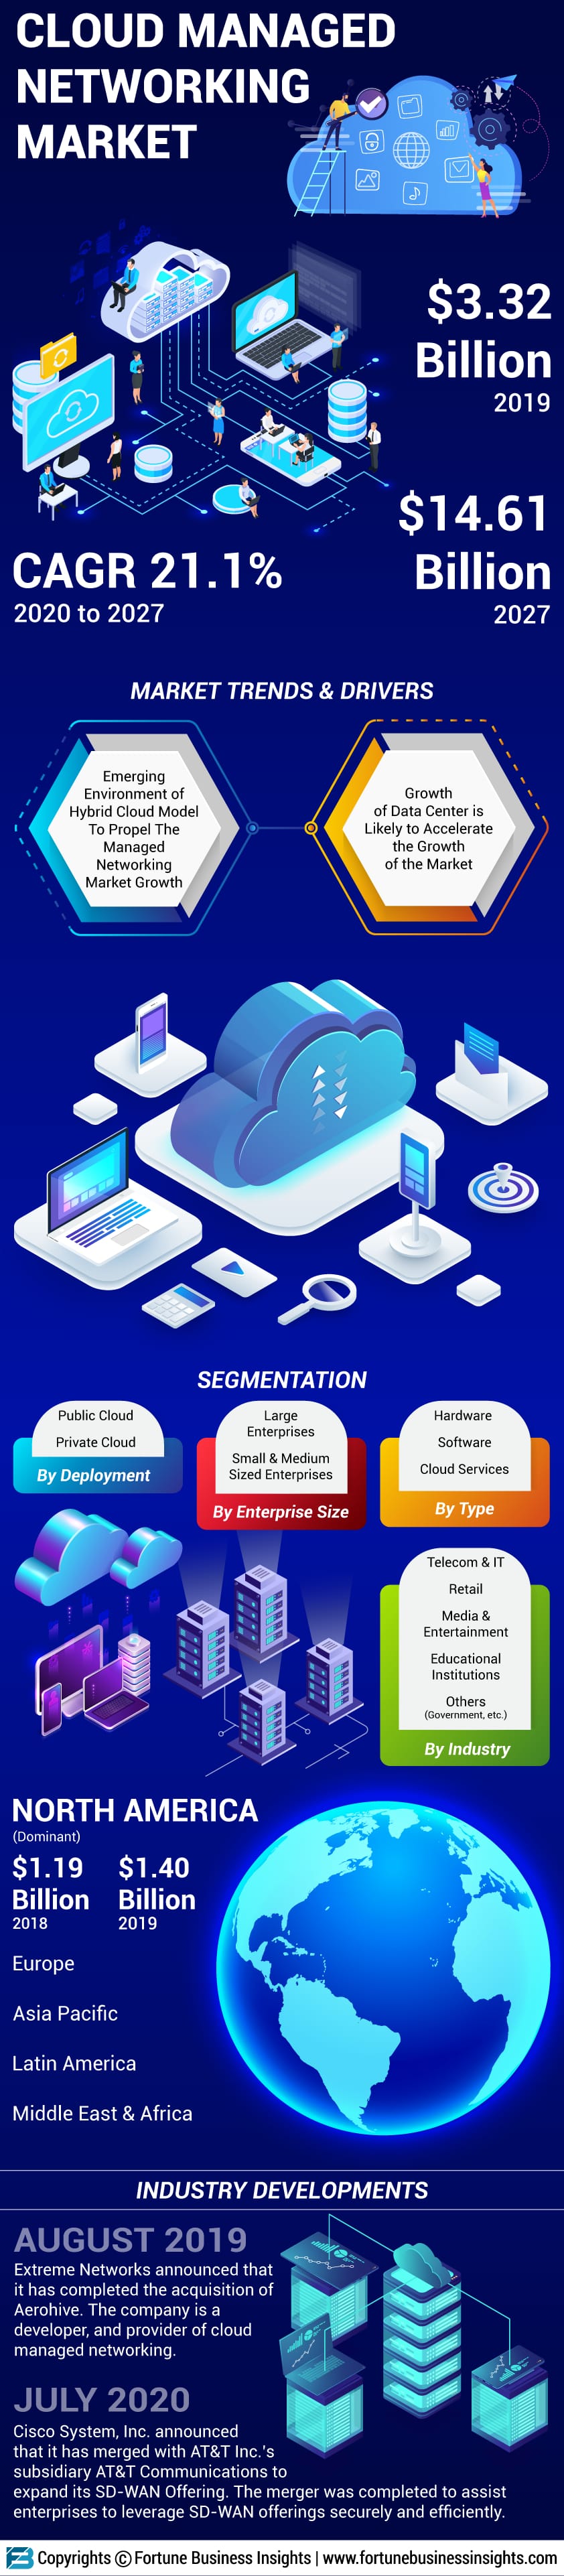 Cloud Managed Networking Market